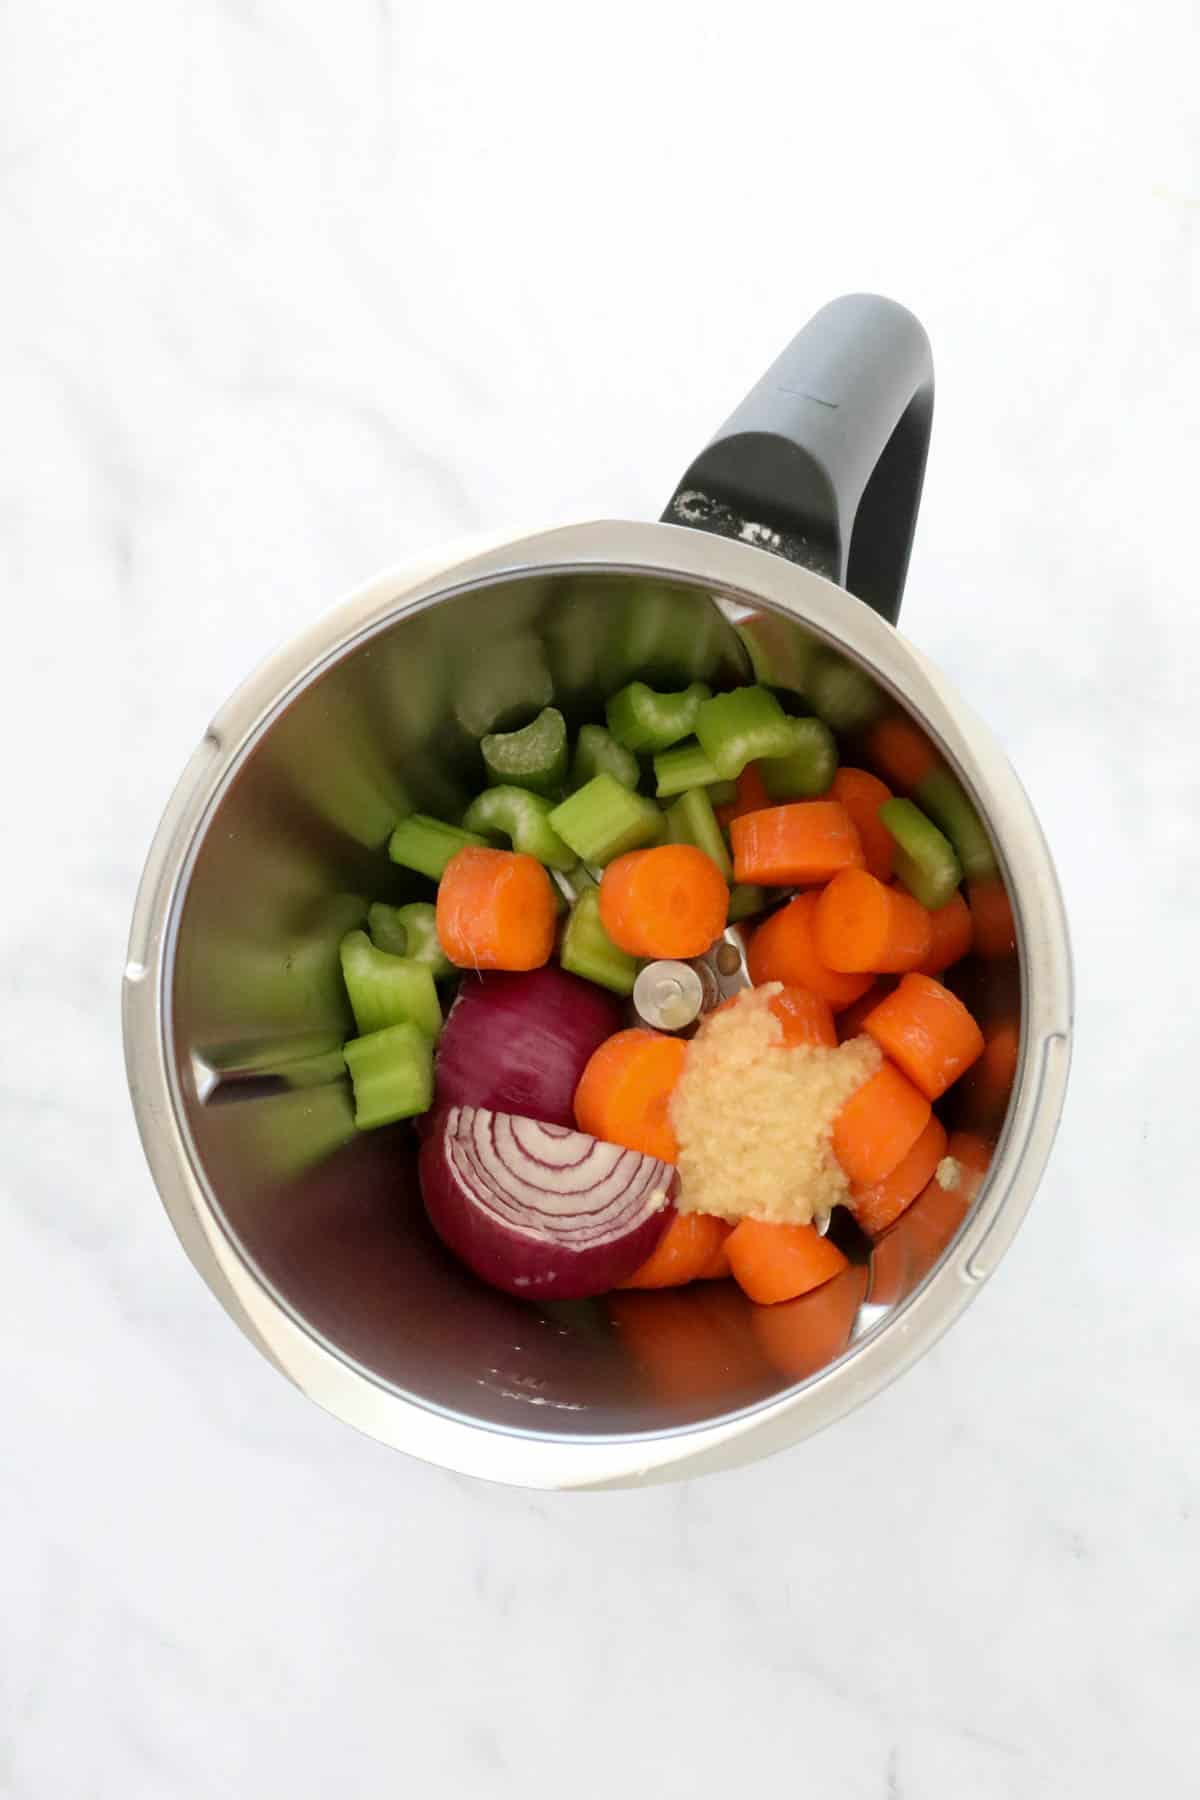 Roughly chopped vegetables in a Thermomix.